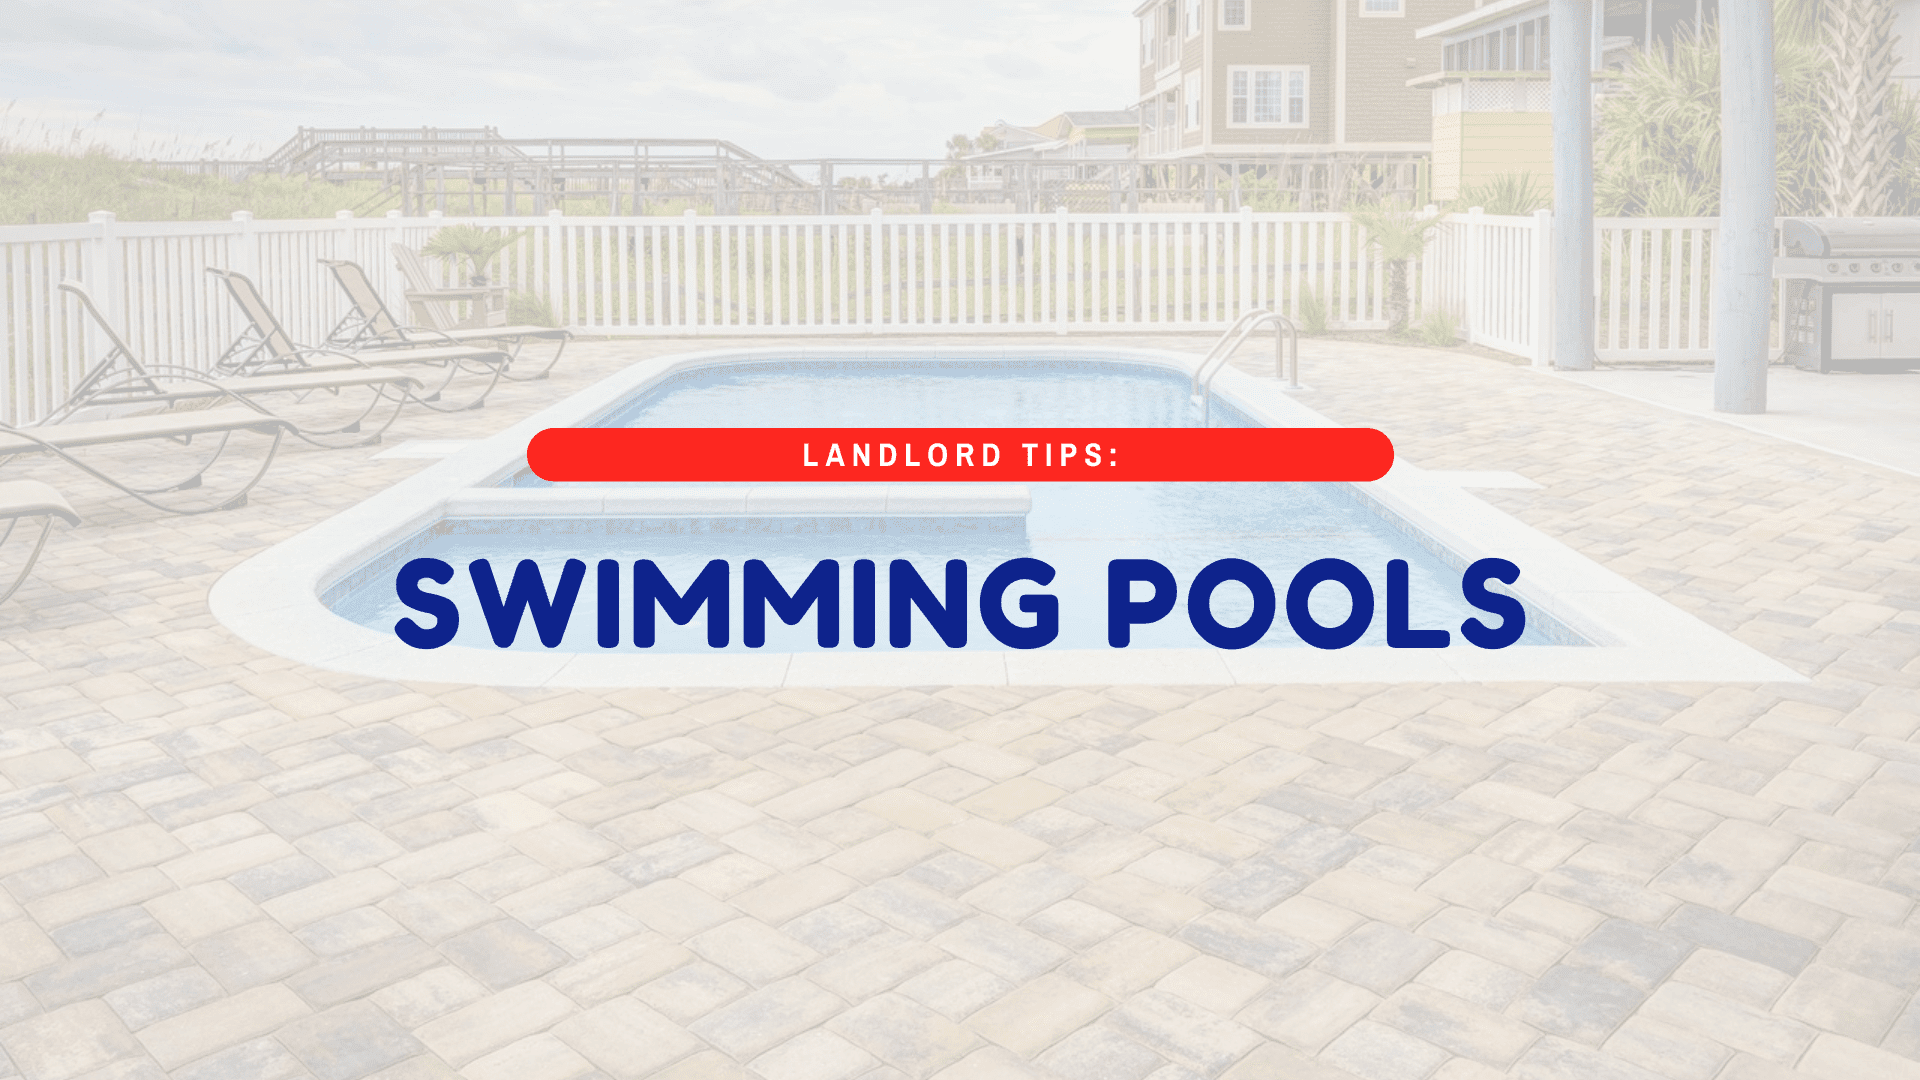 What Landlords Need to Consider About Swimming Pools | Irvine Real Estate Investing